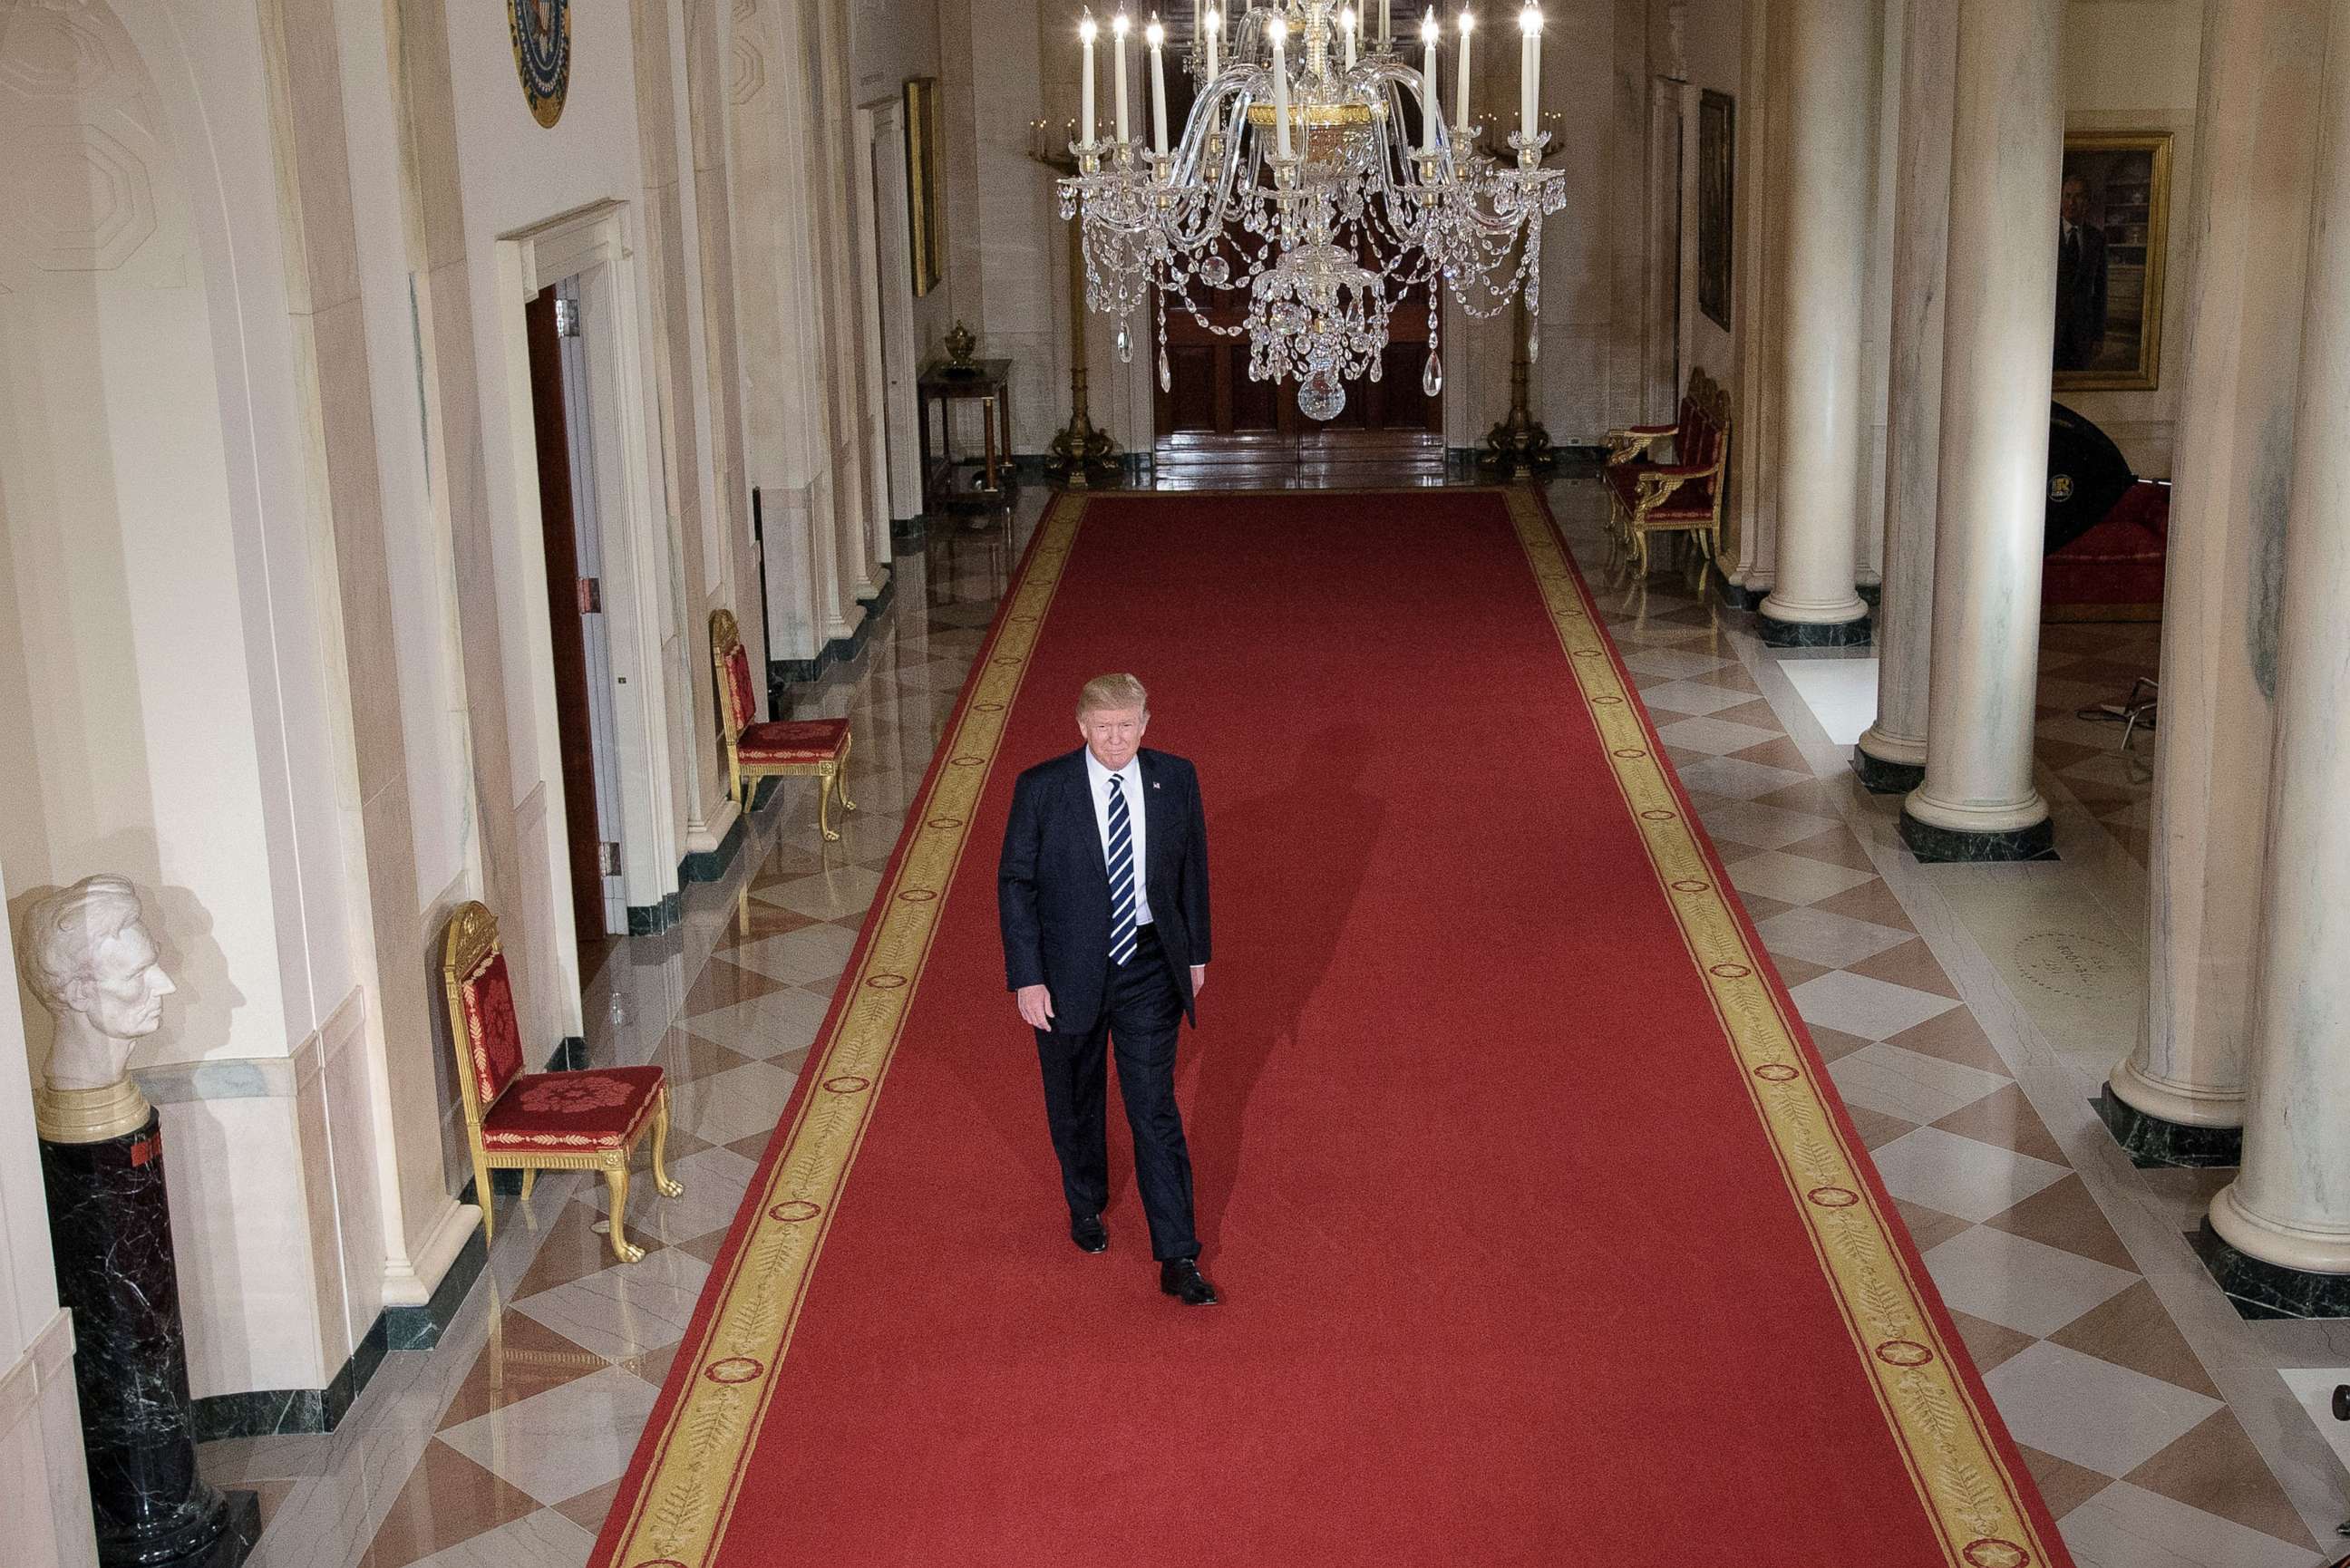 PHOTO: President Donald Trump walks through the Cross Hall to the East Room to nominate Neil M. Gorsuch to take Justice Antonin Scalia's vacancy on the US Supreme Court during an event at the White House, Jan. 31, 2017.
